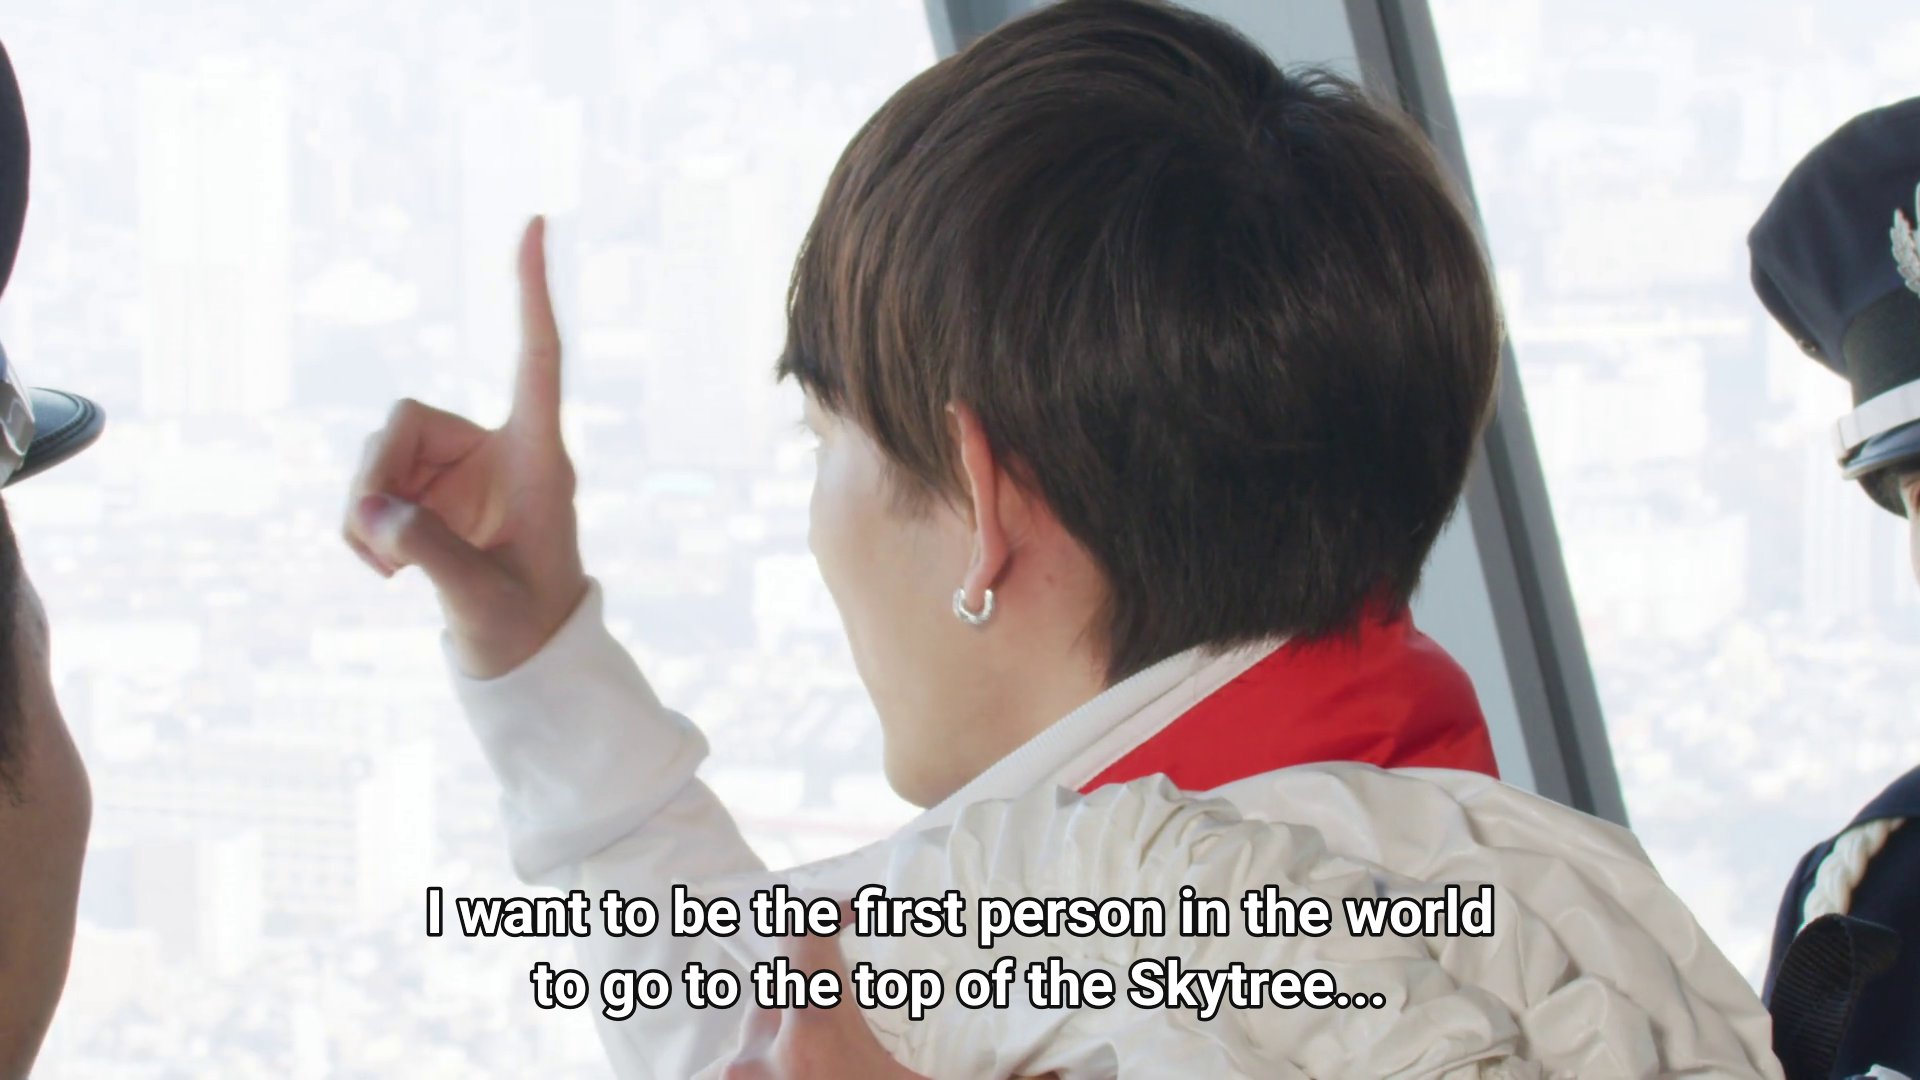 Kaito, a young man with short hair and a horseshoe earring.  Kaito: I want to be the first person in the world to go to the top of the Skytree.